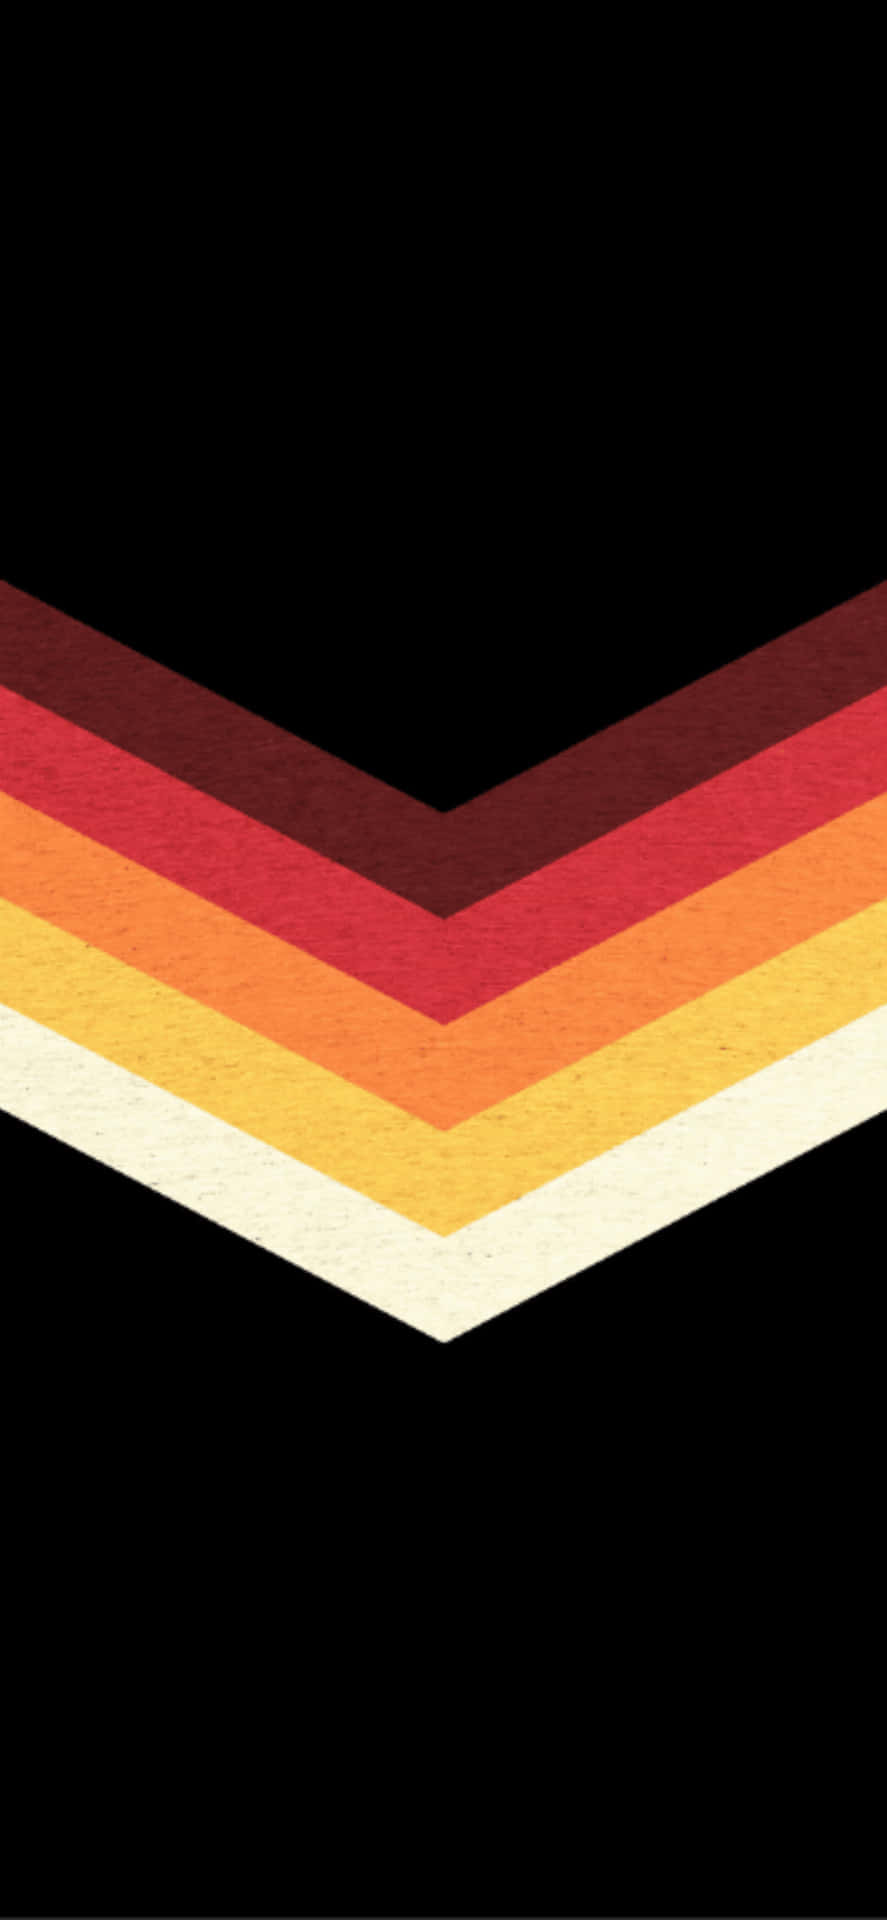 A Chevron With A Red, Orange, Yellow And Blue Color